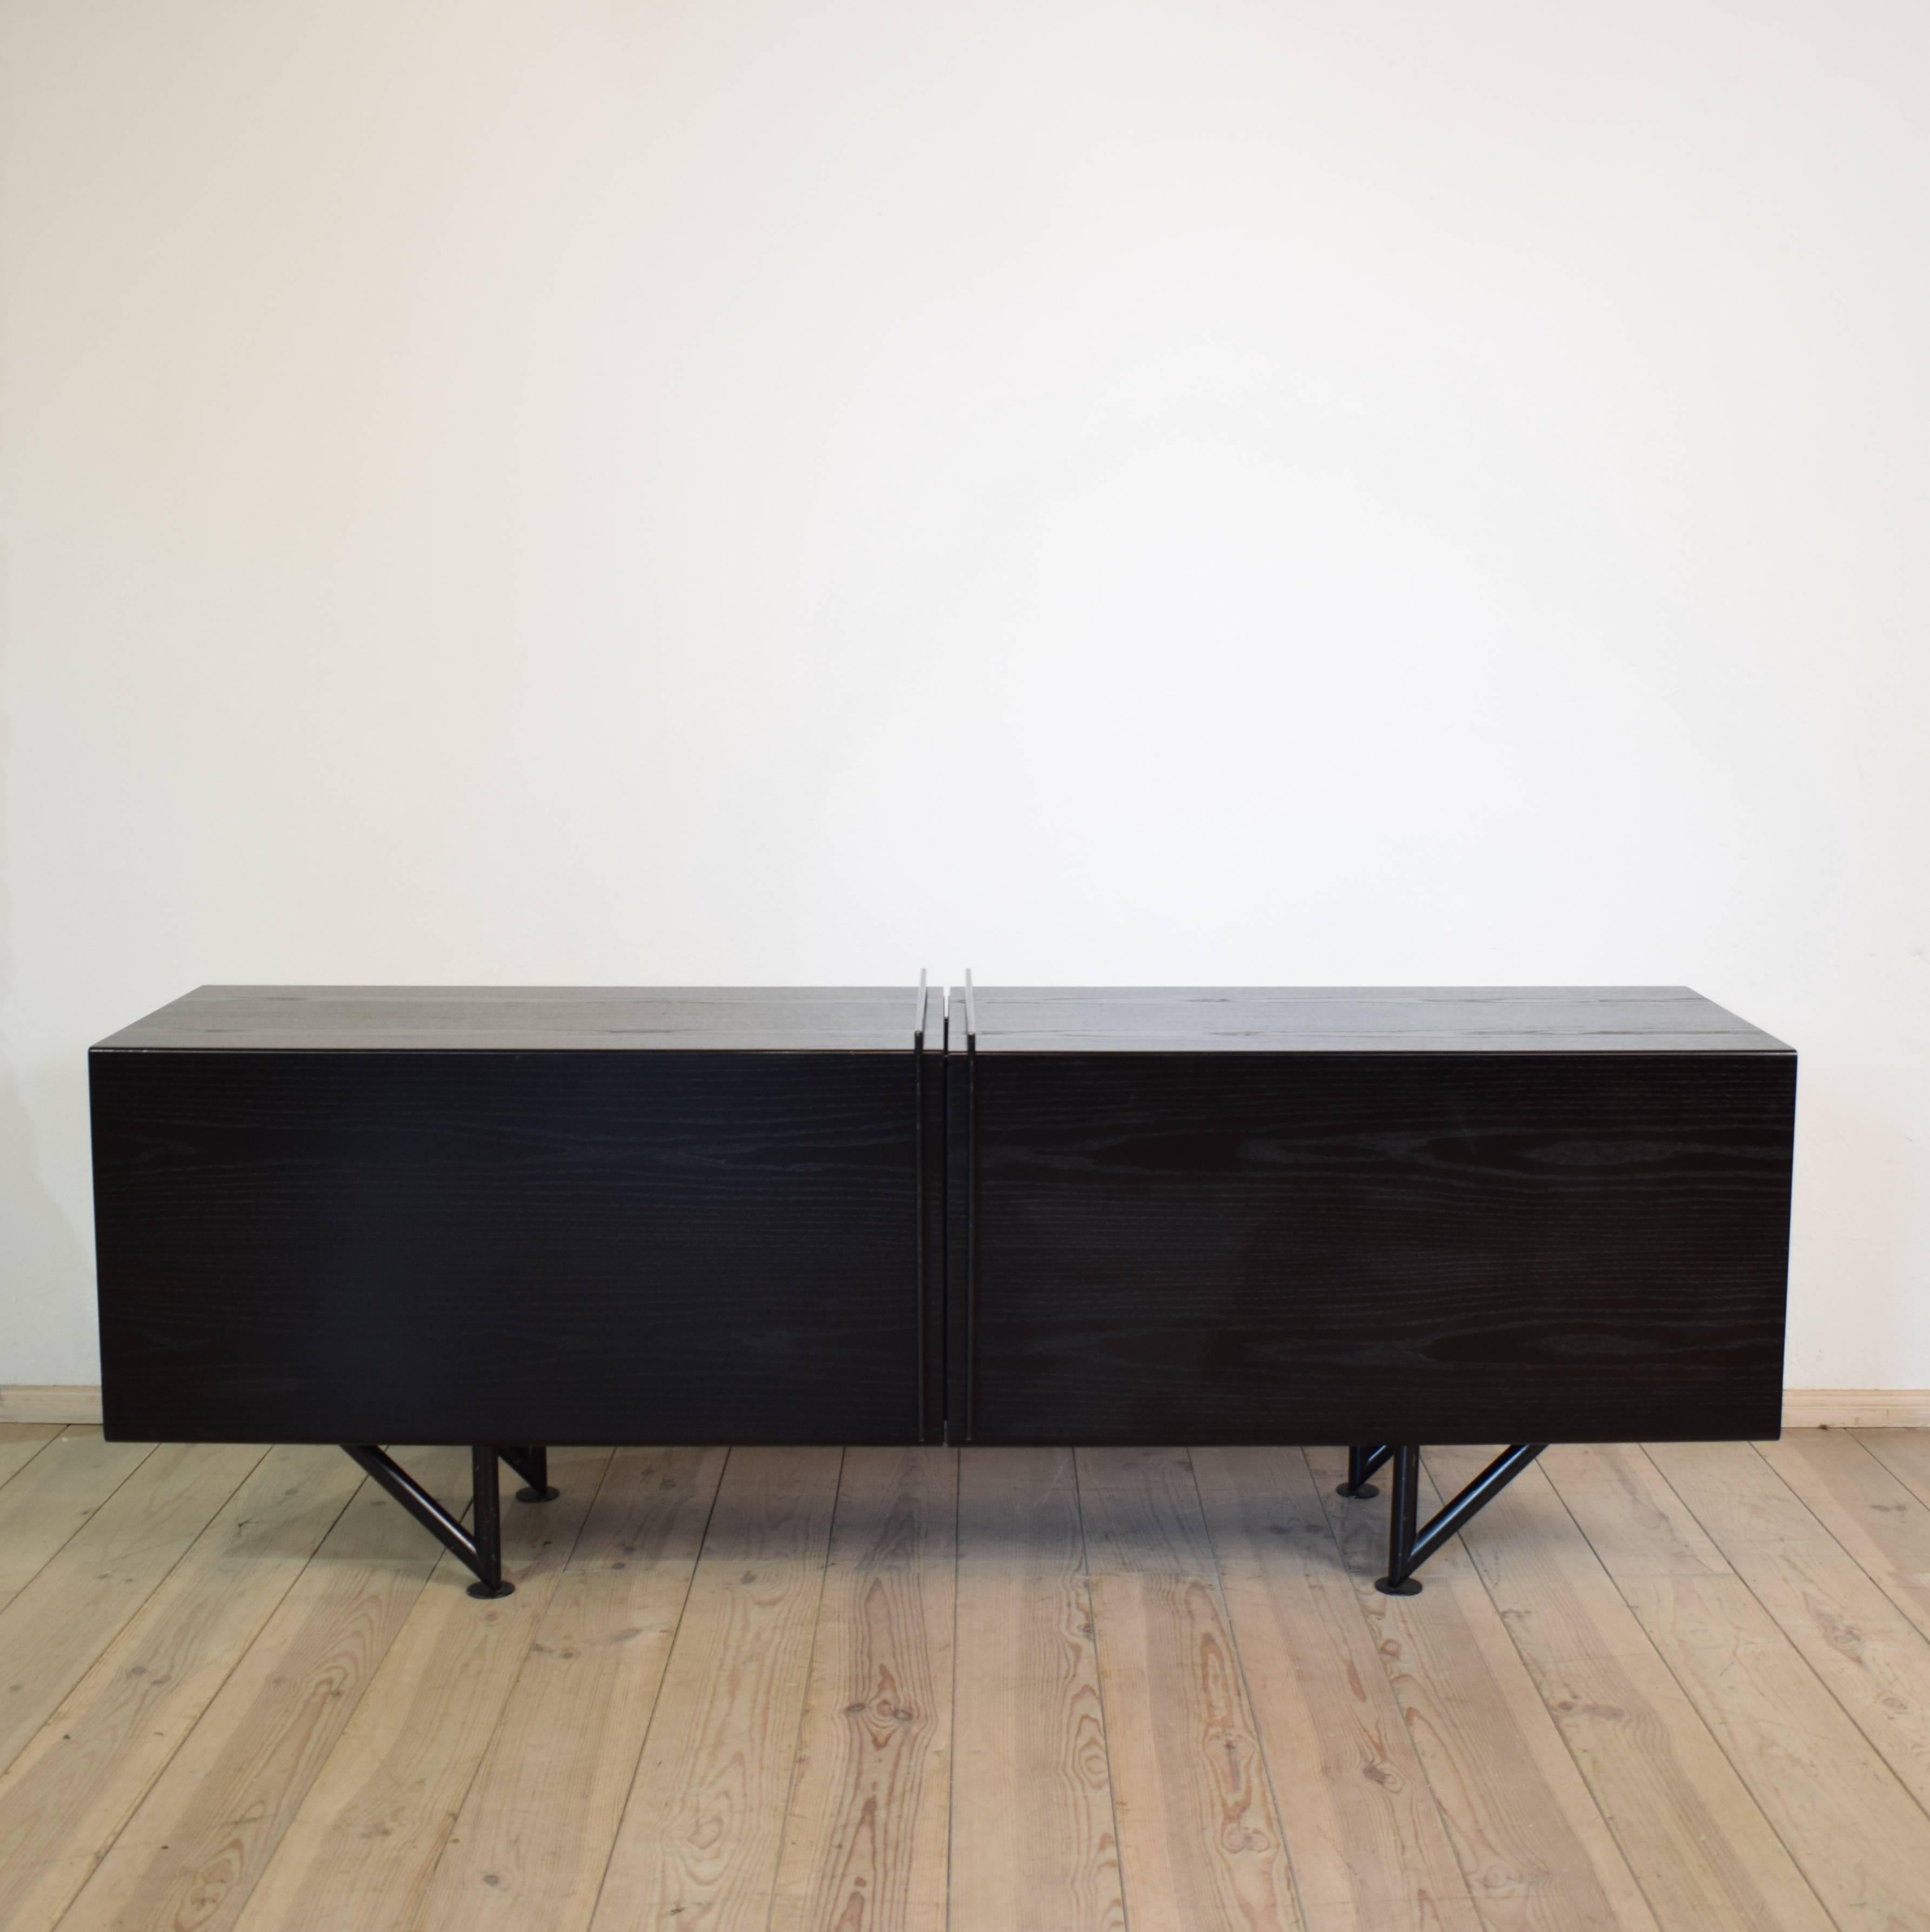 German Postmodern Memphis Group Style Sideboard in Black and Blue, 1980s For Sale